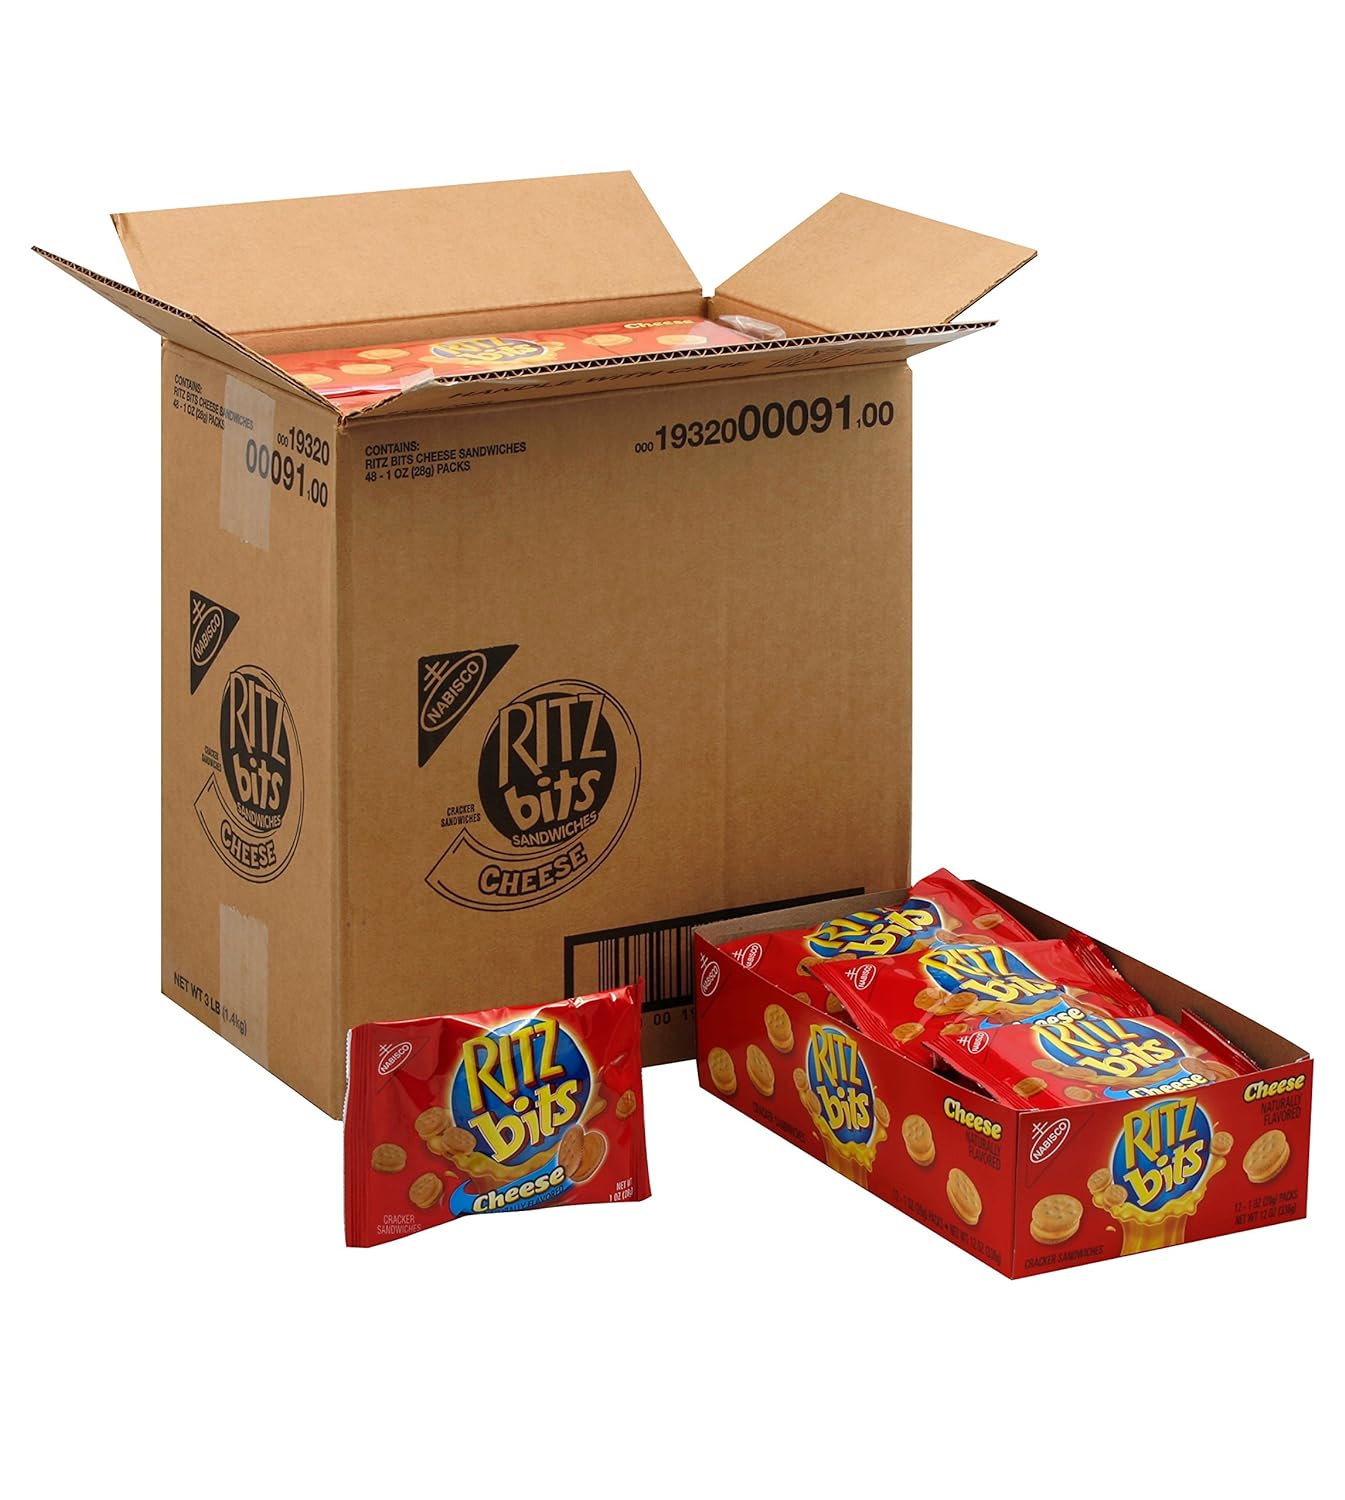 Wholesale prices with free shipping all over United States RITZ Peanut Butter Sandwich Cracker Snacks and Cheese Sandwich Crackers, Snack Crackers Variety Pack, 32 Snack Packs - Steven Deals